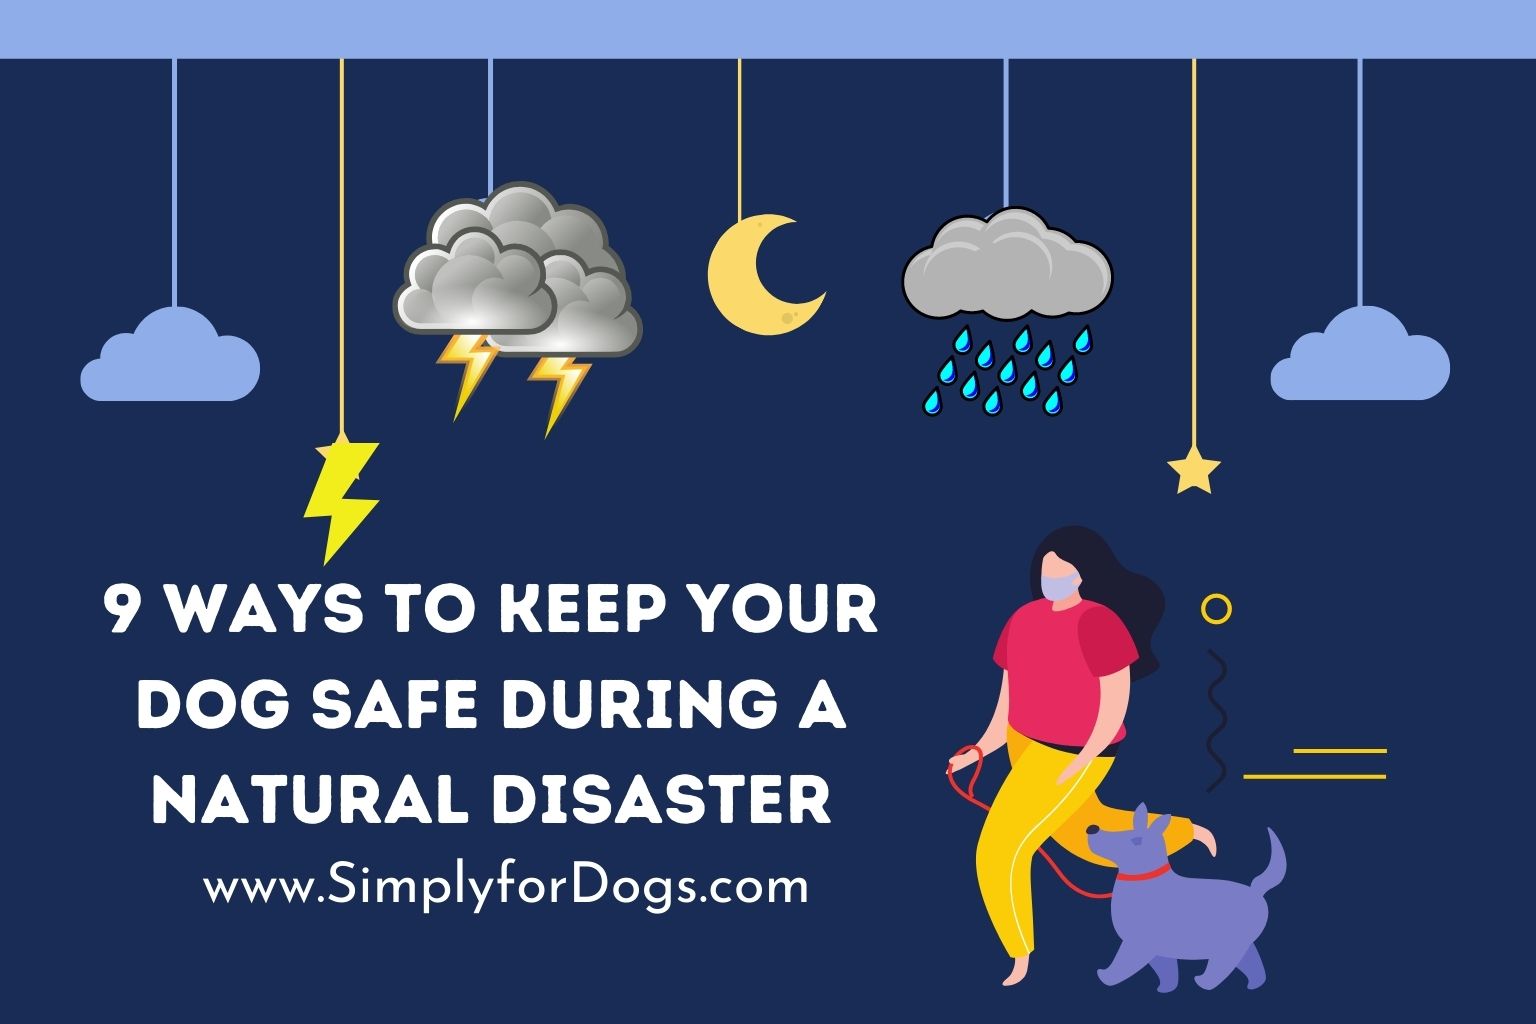 9 Ways to Keep Your Dog Safe During a Natural Disaster